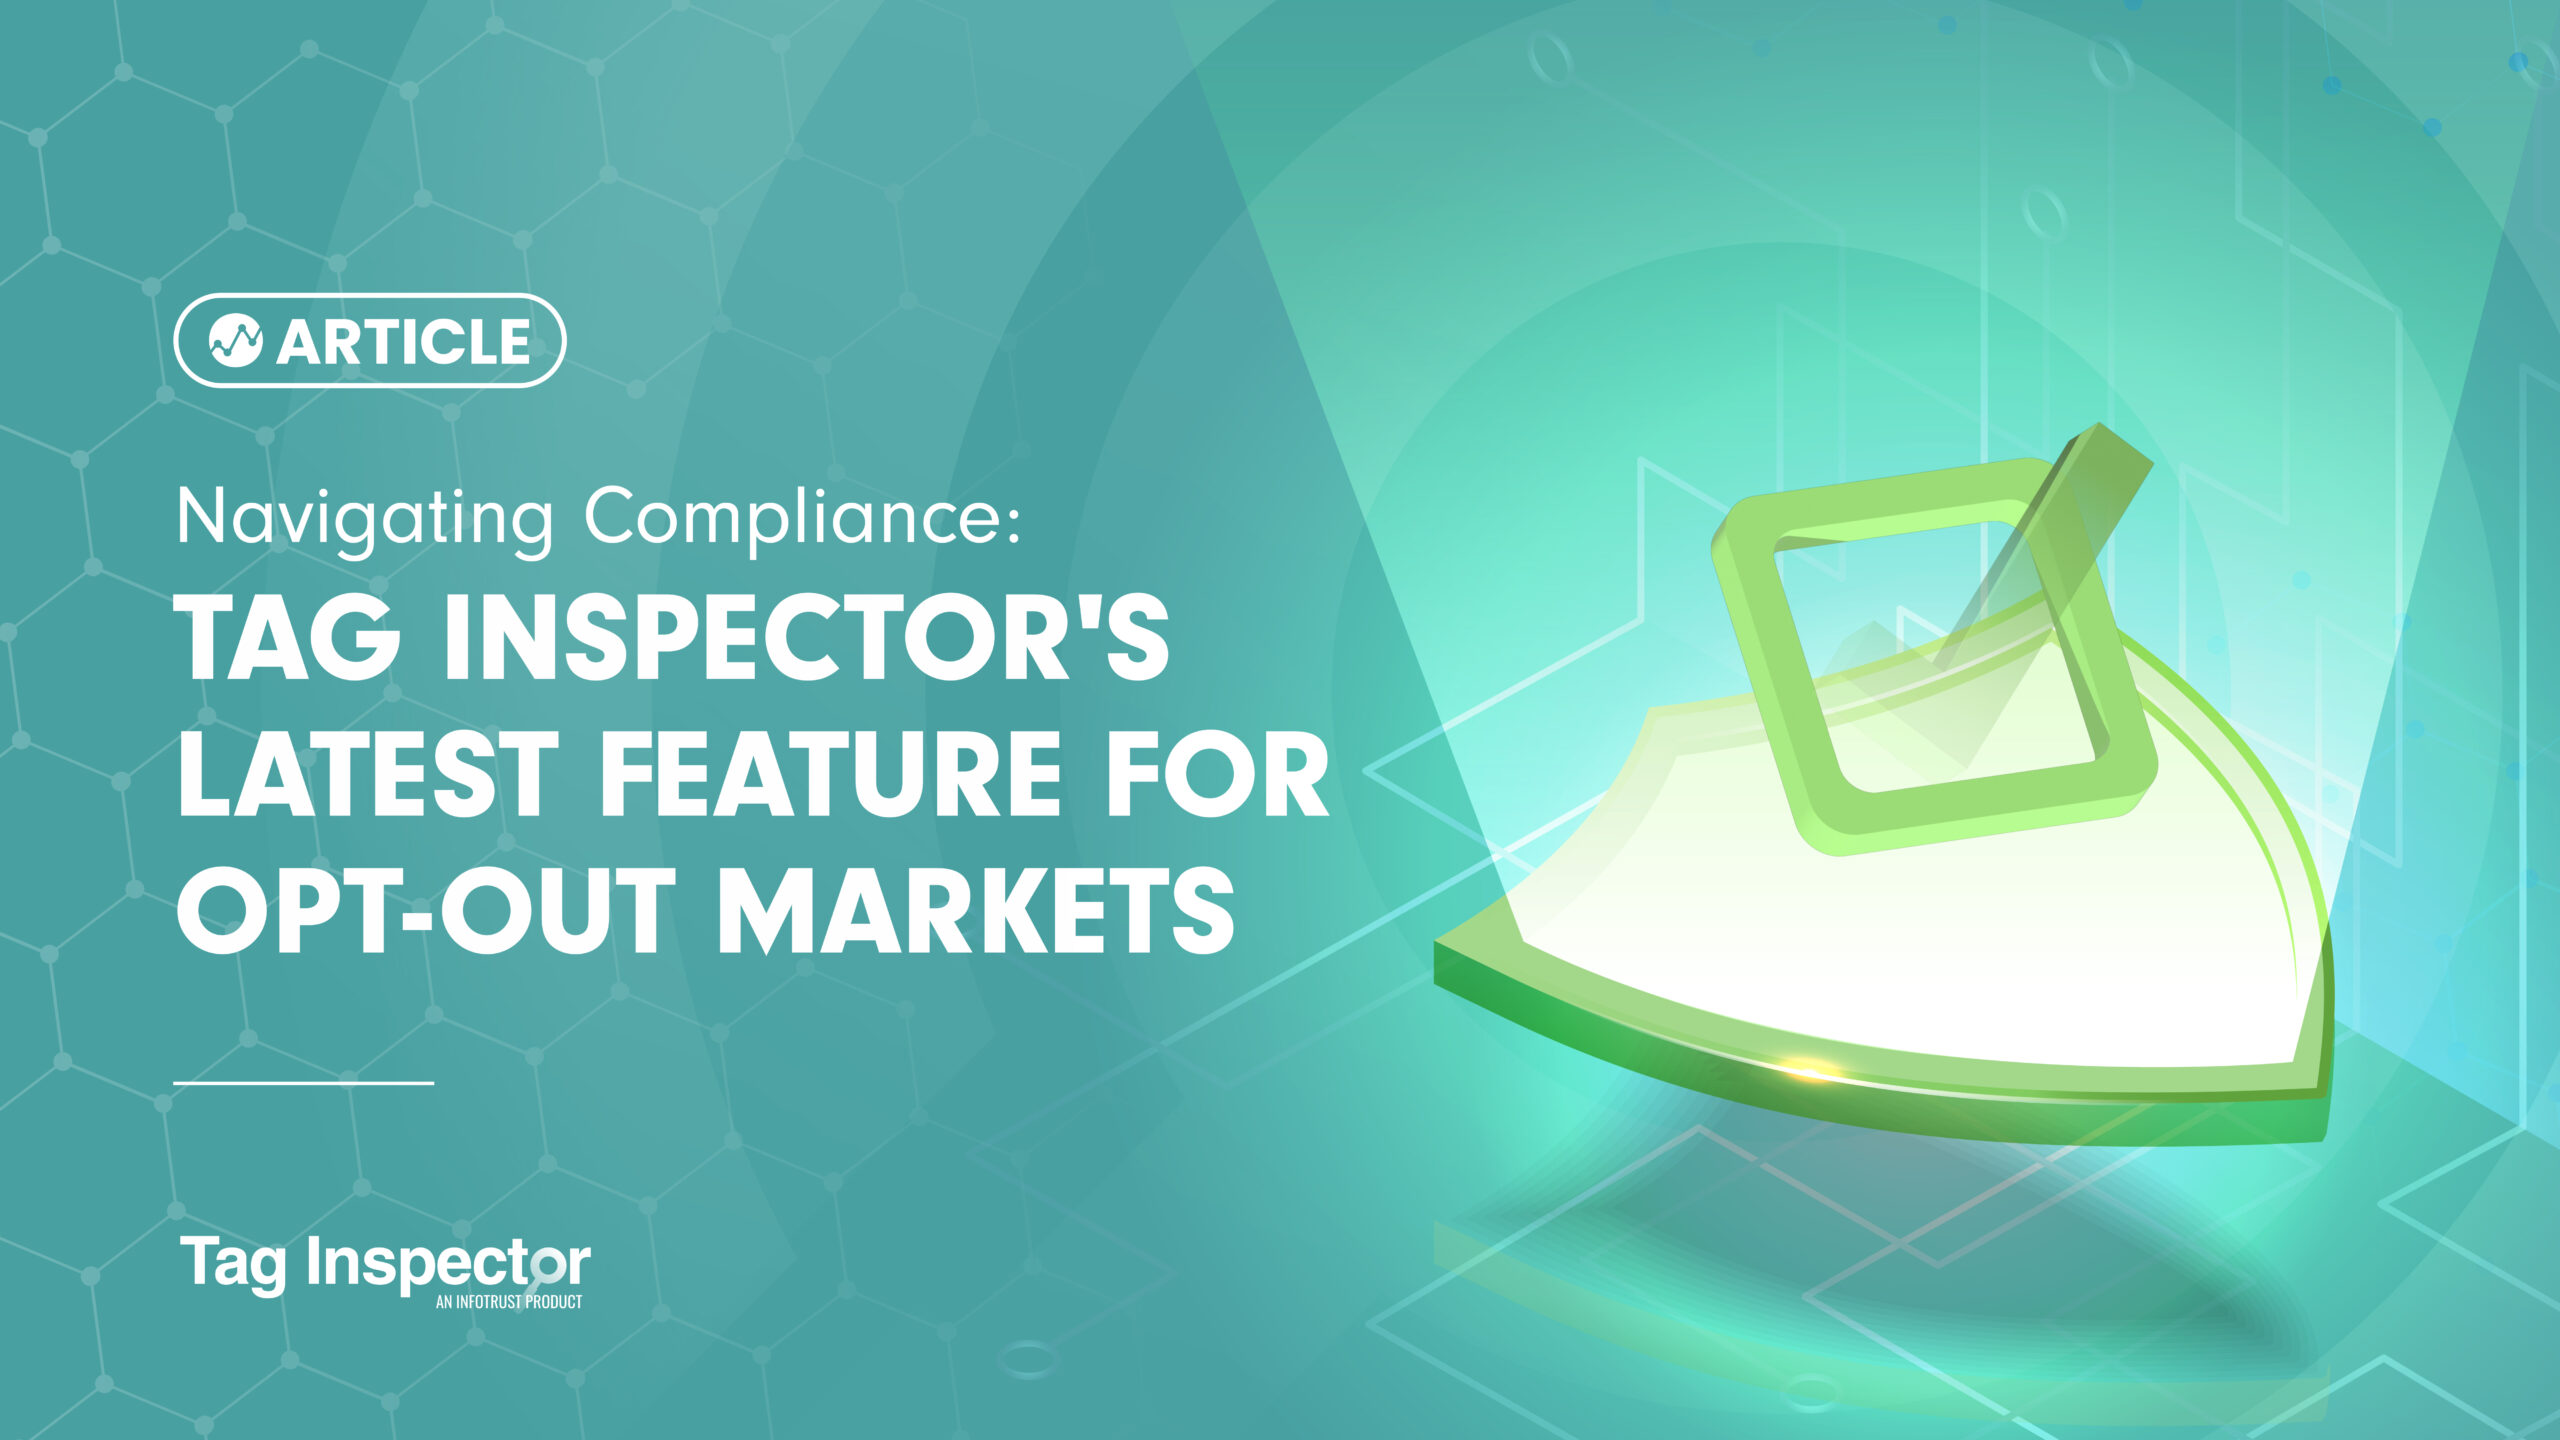 Navigating Compliance: Tag Inspector's Latest Feature for Opt-Out Markets